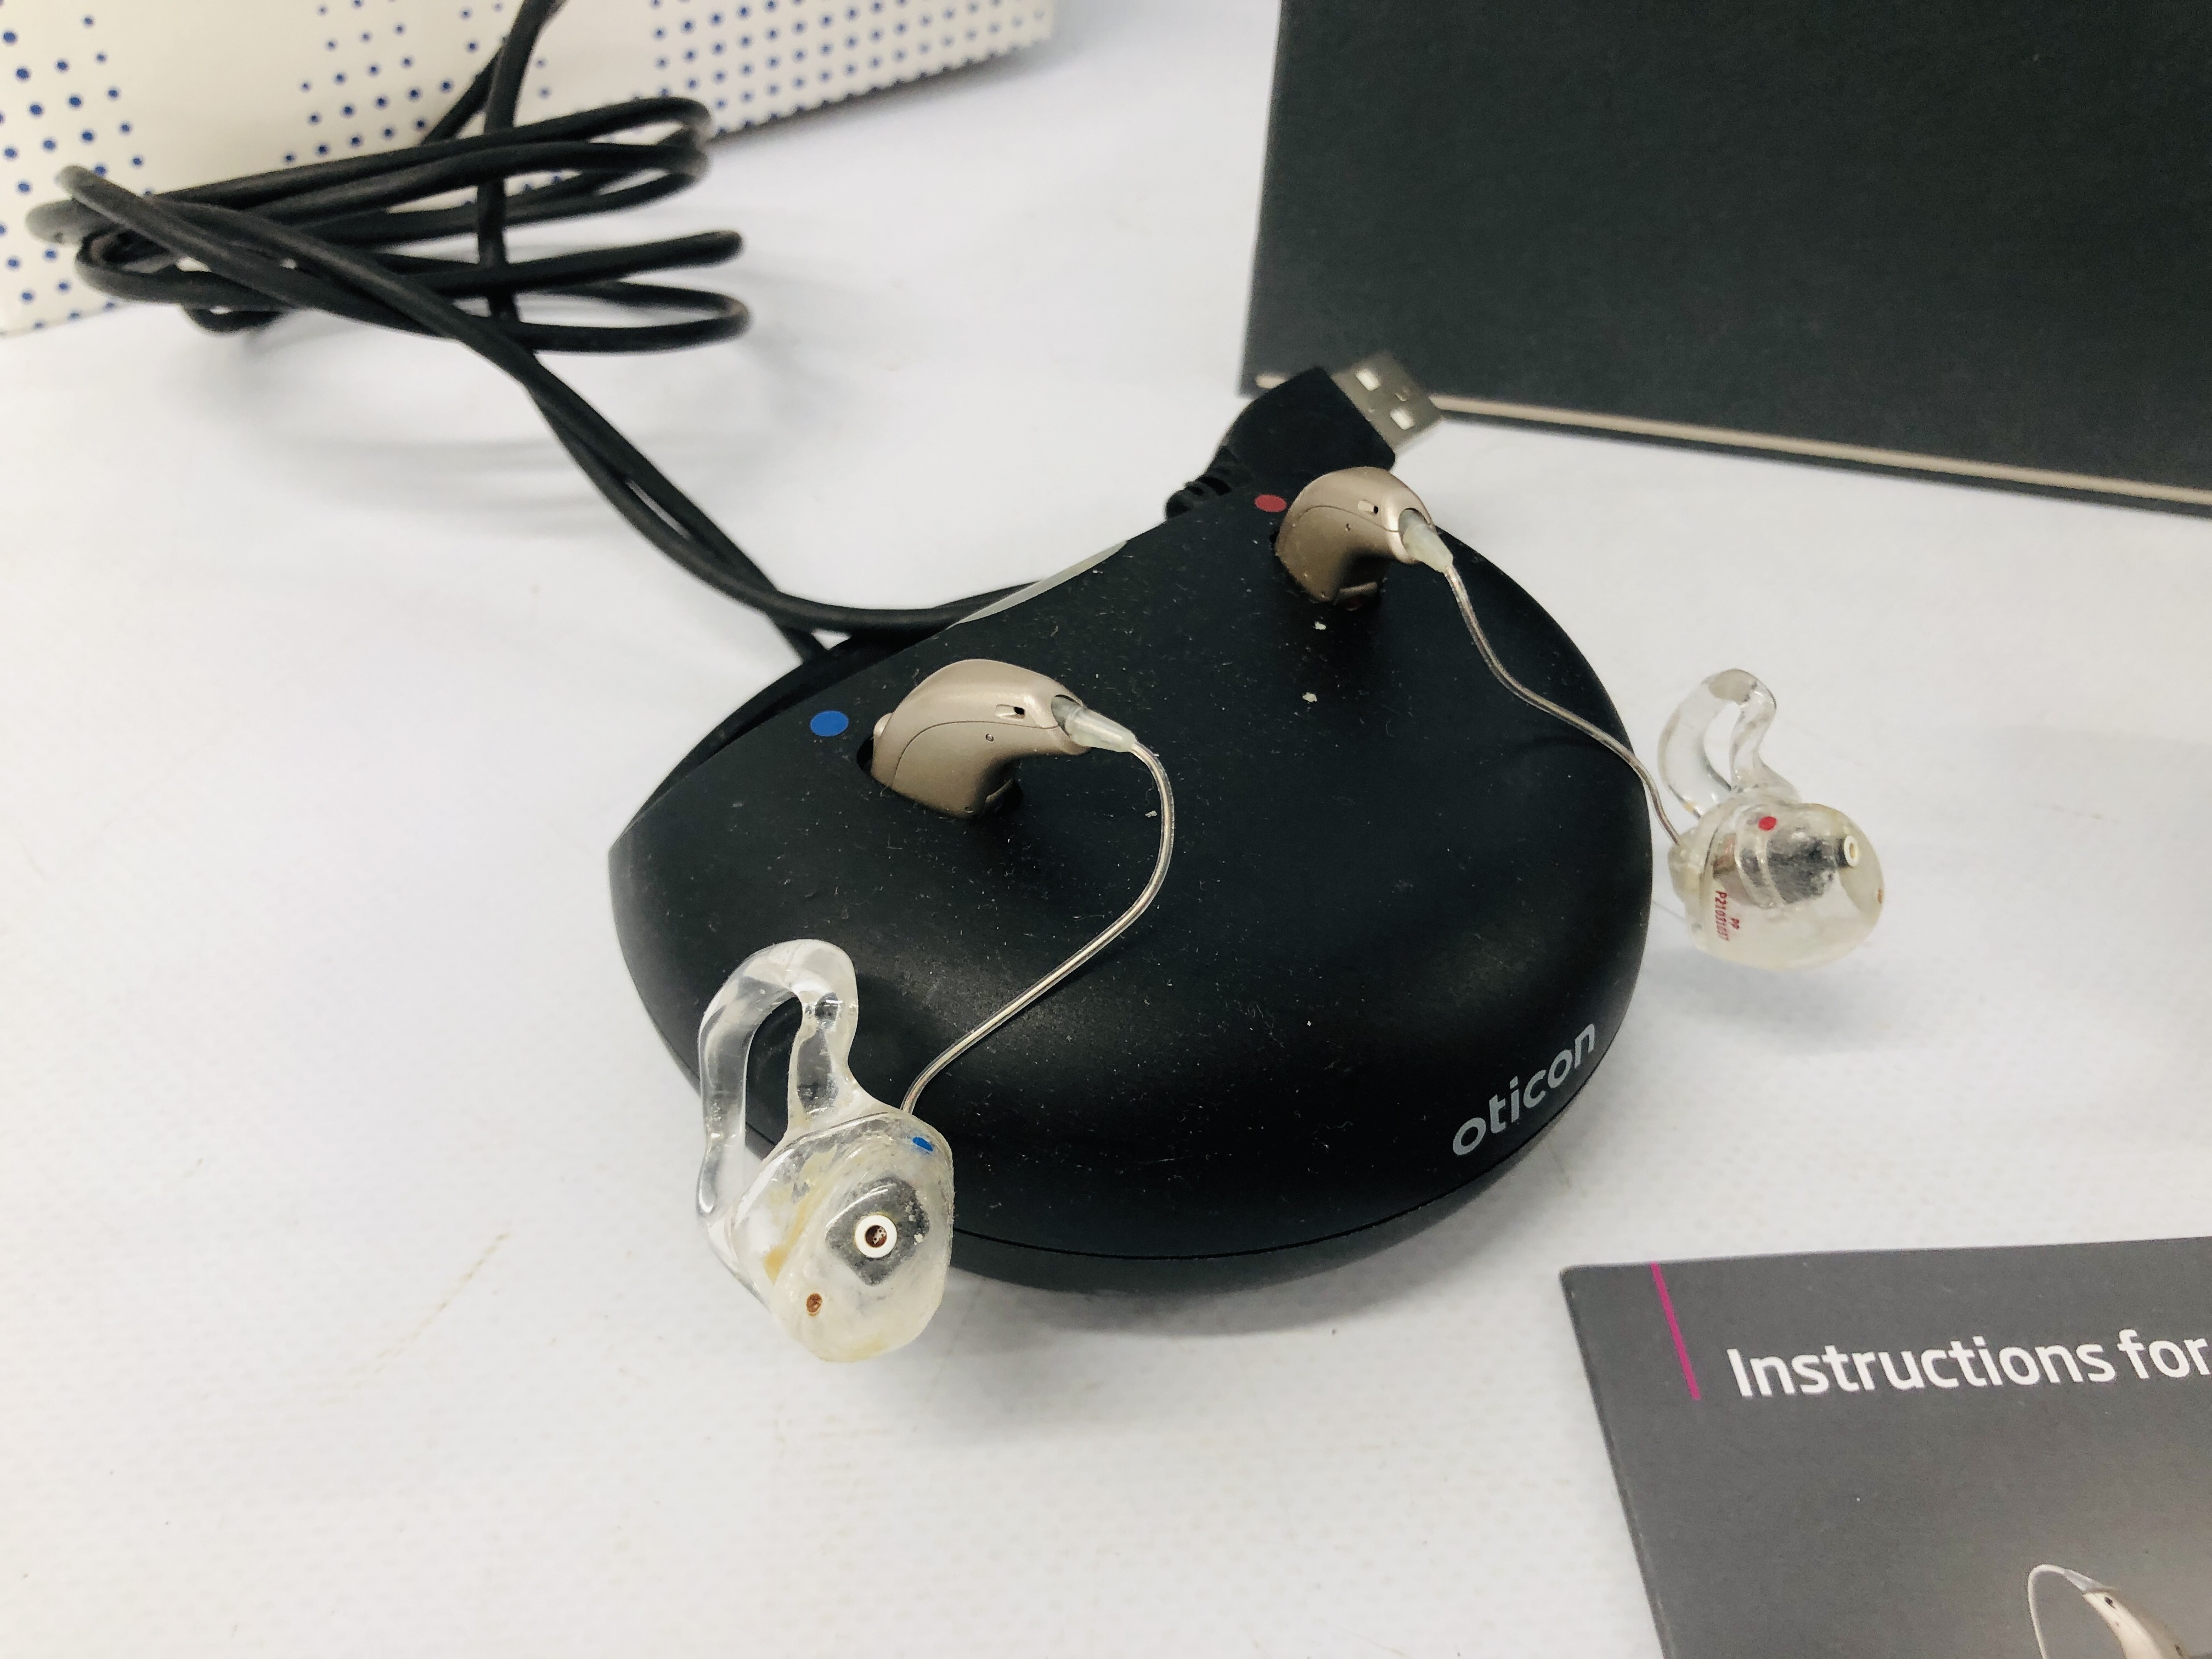 TWO PAIRS OF OTICON HEARING AIDS WITH BOXES (NOT GUARANTEED COMPLETE) - Image 2 of 5